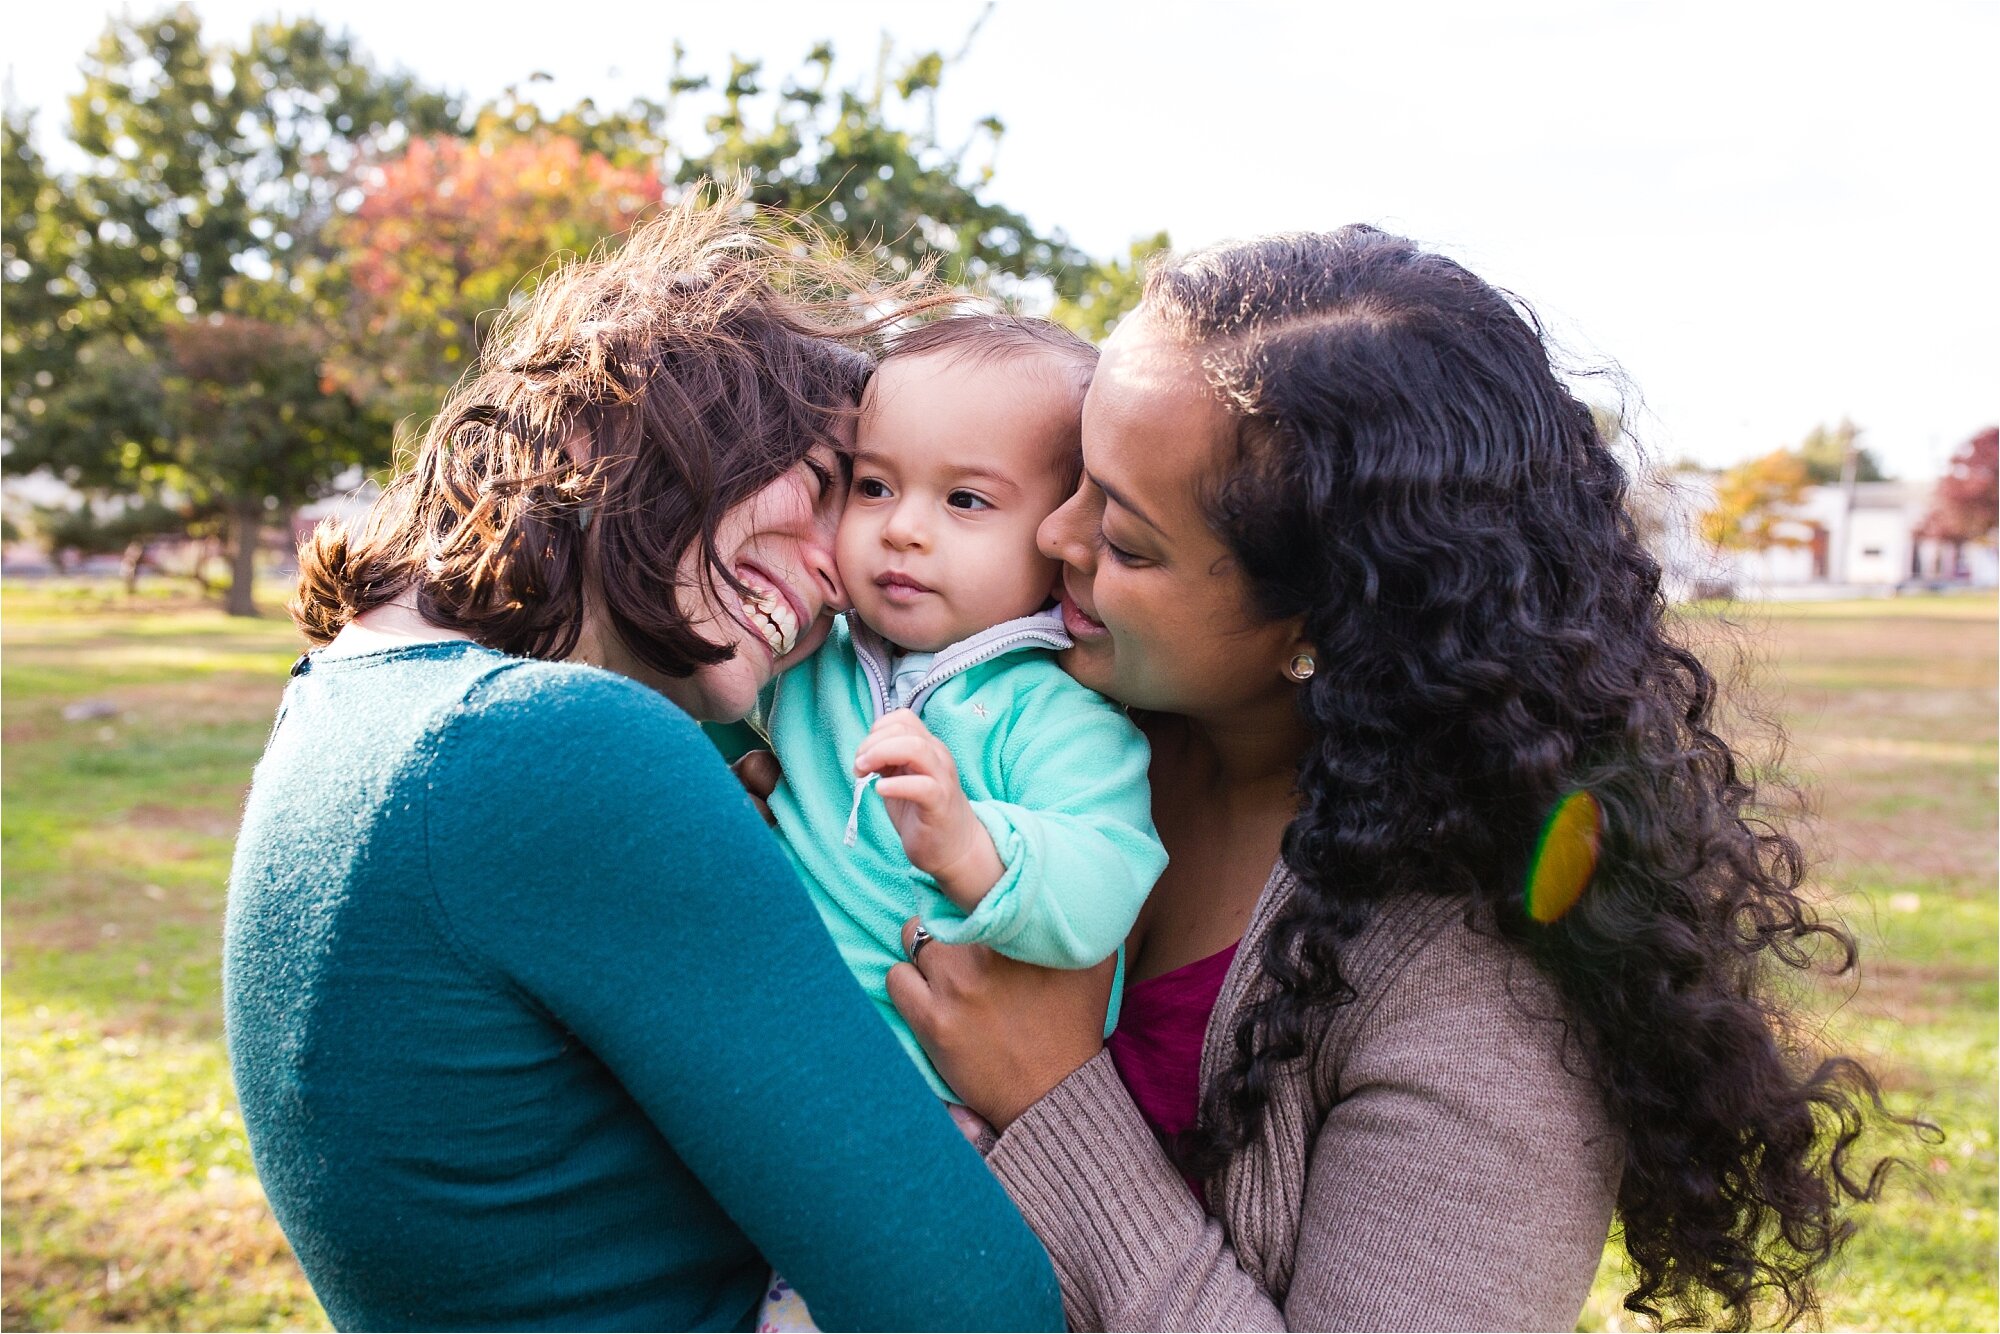 Lesbian gay mommies smile and have a group hug their baby daughter, Family Photographer Philadelphia